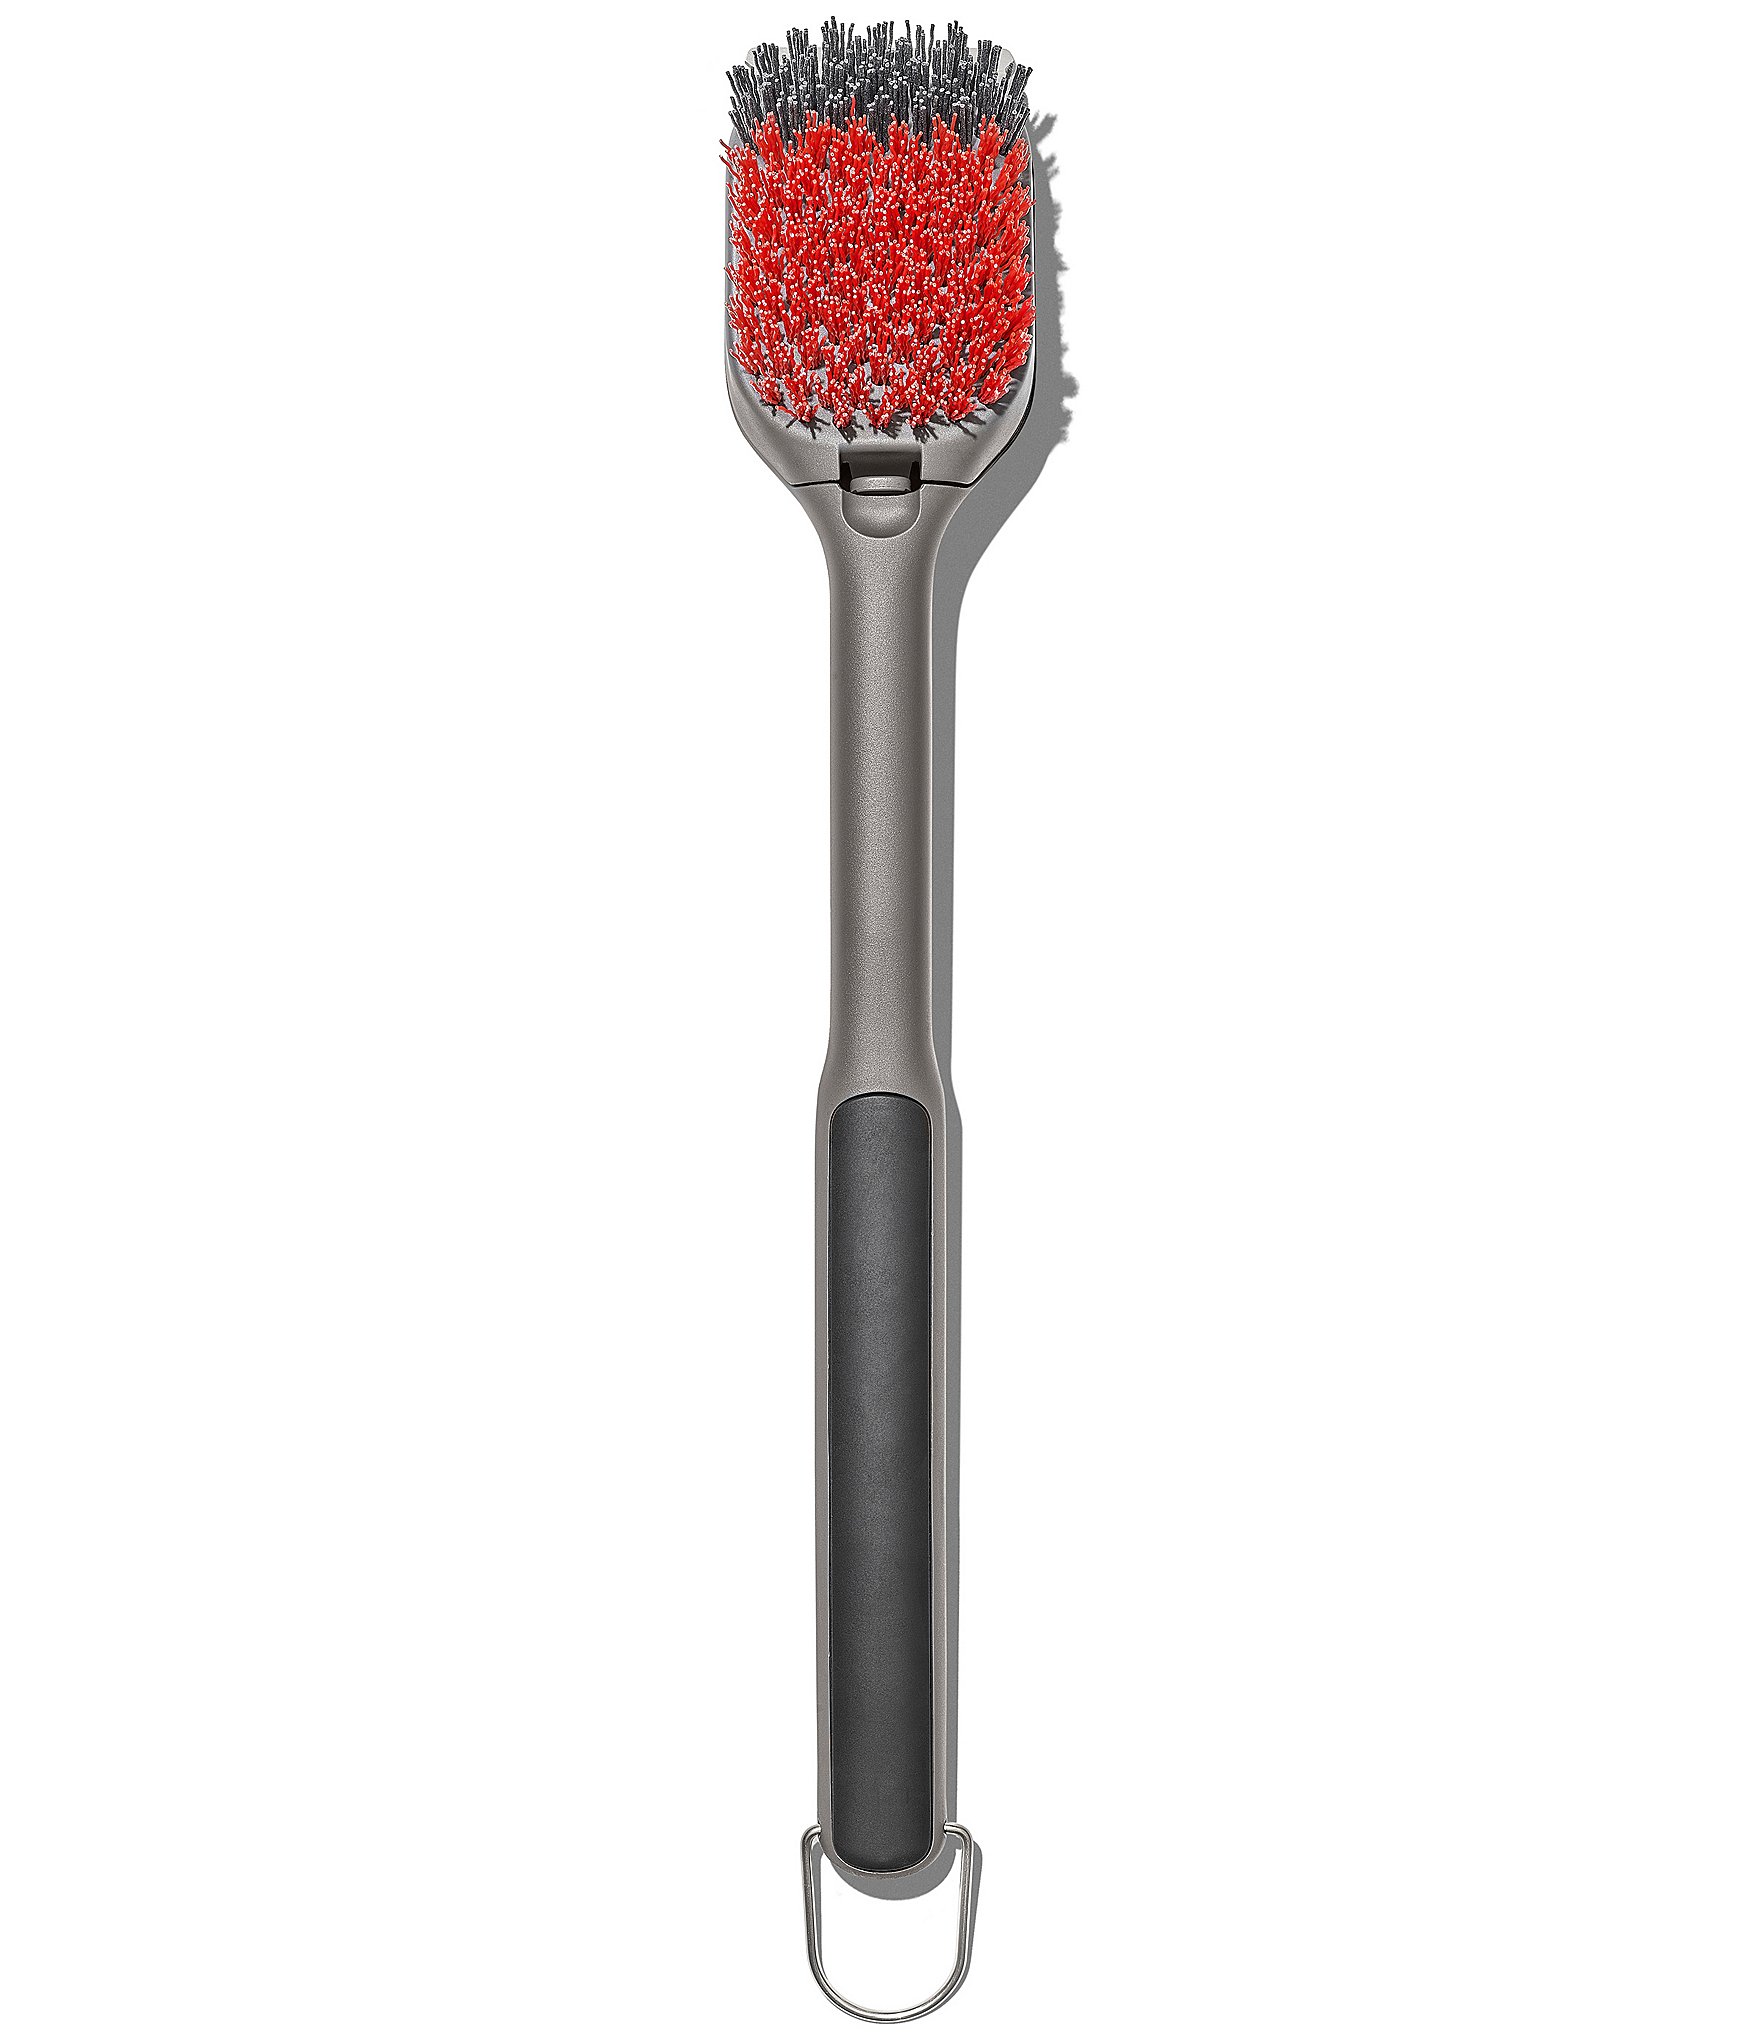 https://dimg.dillards.com/is/image/DillardsZoom/zoom/oxo-good-grips-nylon-grill-brush-for-cold-cleaning/00000000_zi_20287941.jpg